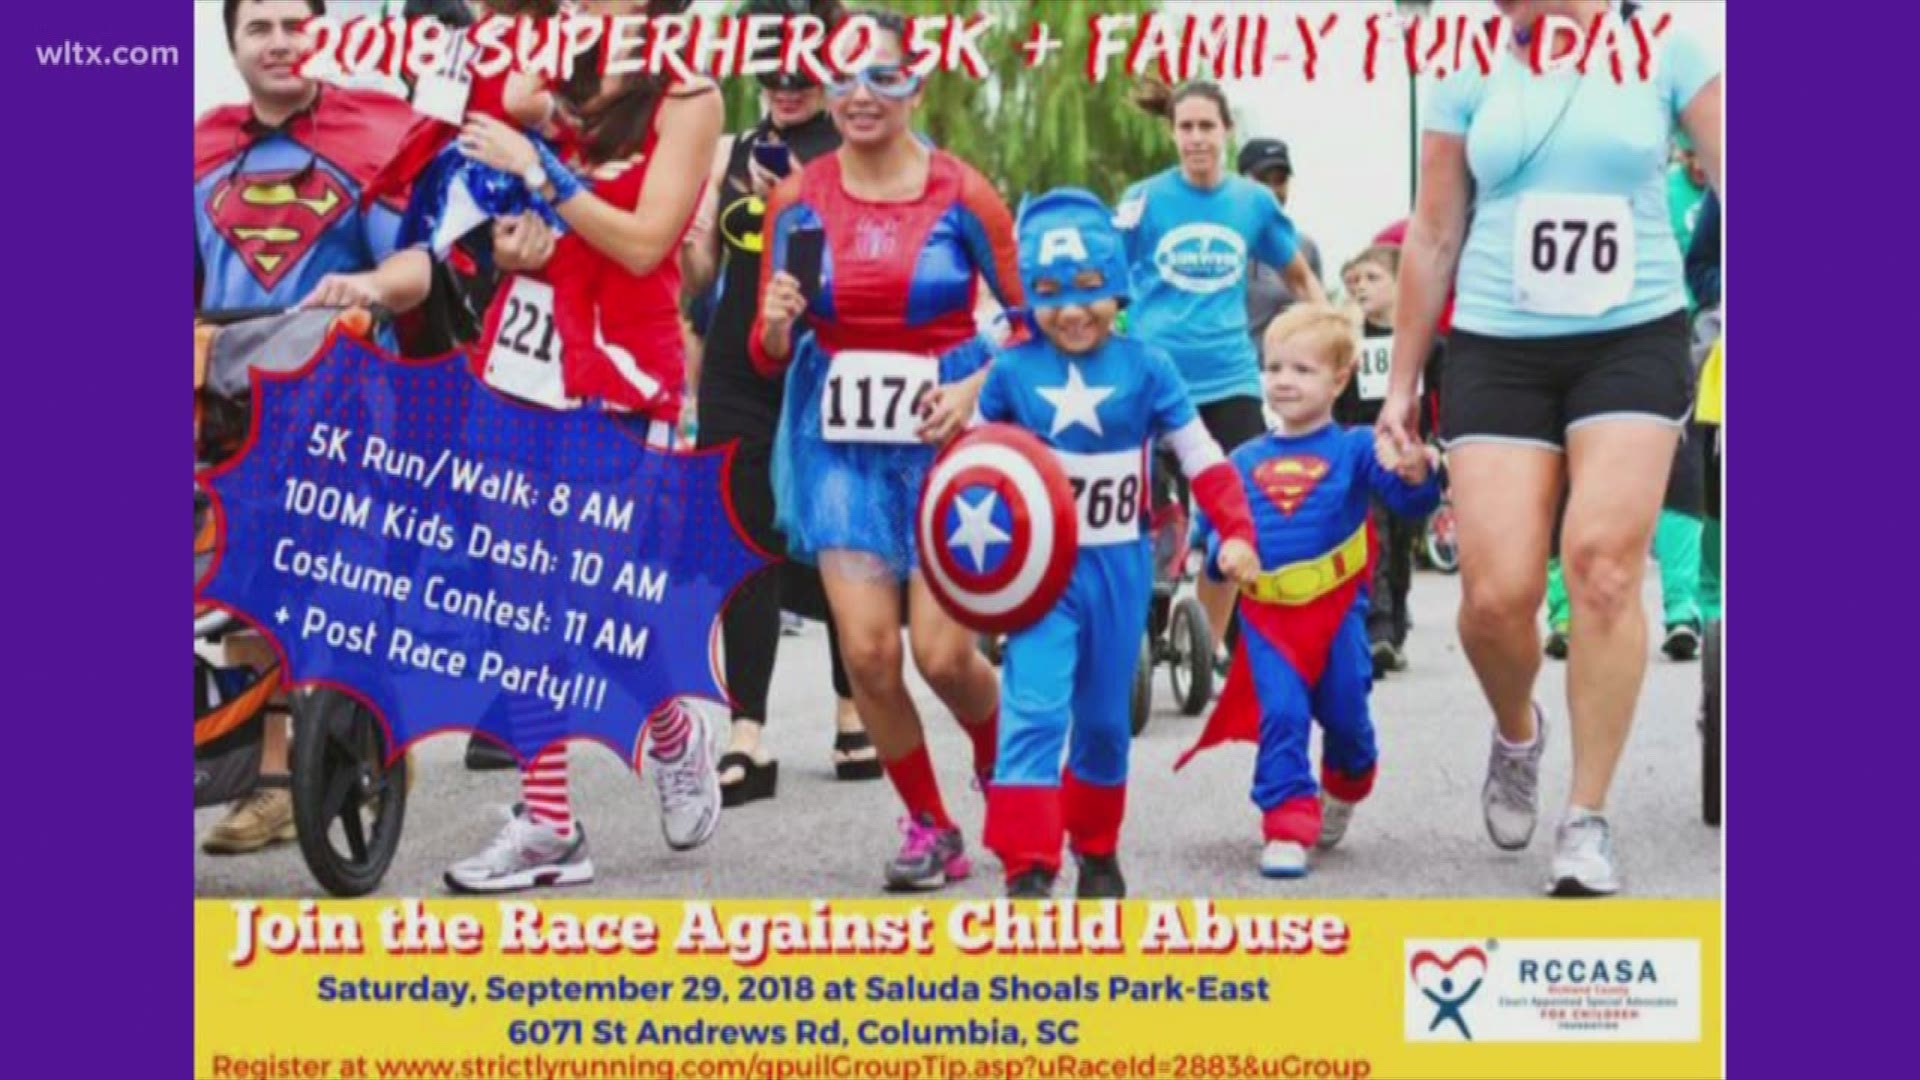 This is the inaugural race to benefit Richland County Court Appointed Special Advocates Foundation, Superheroes for Children 5K.